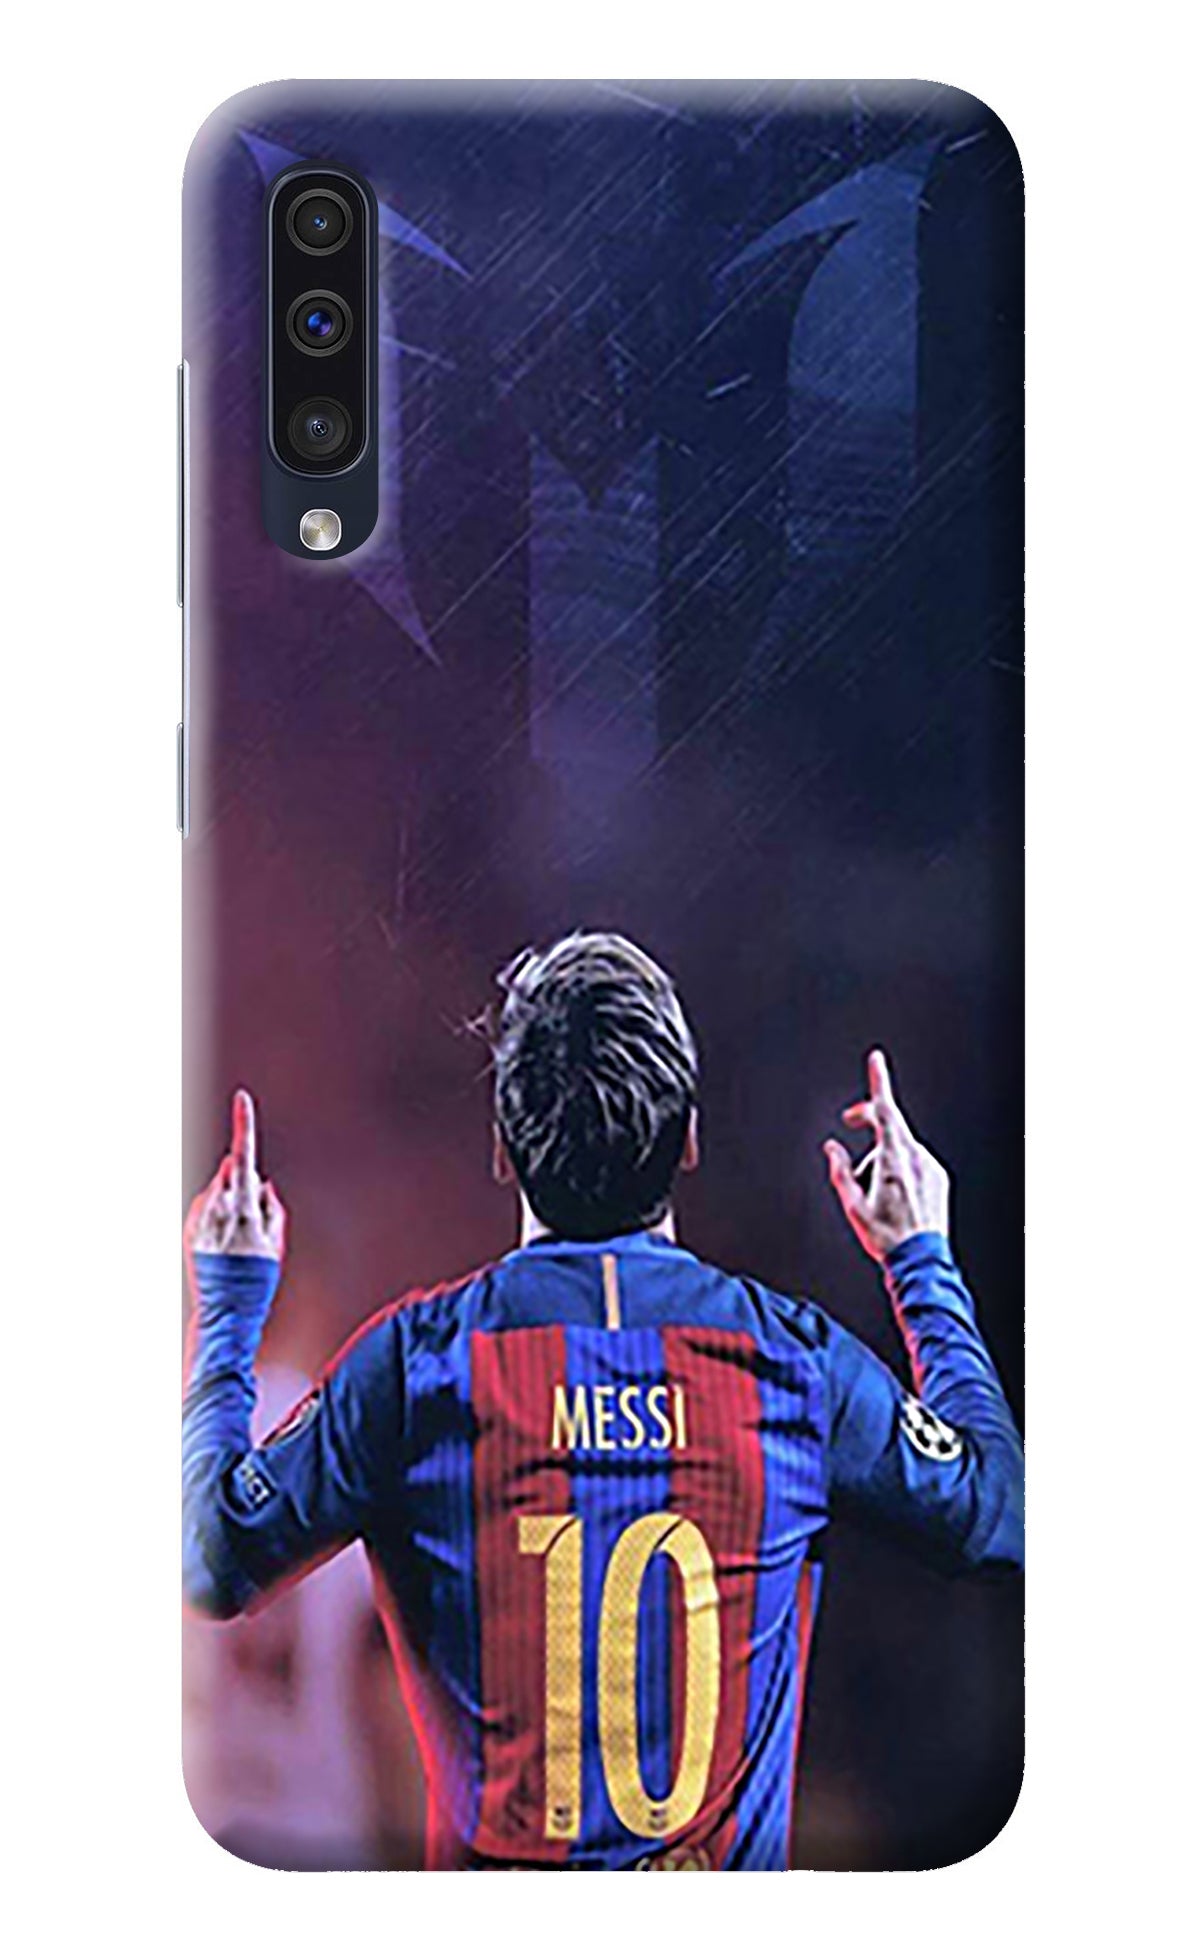 Messi Samsung A50/A50s/A30s Back Cover